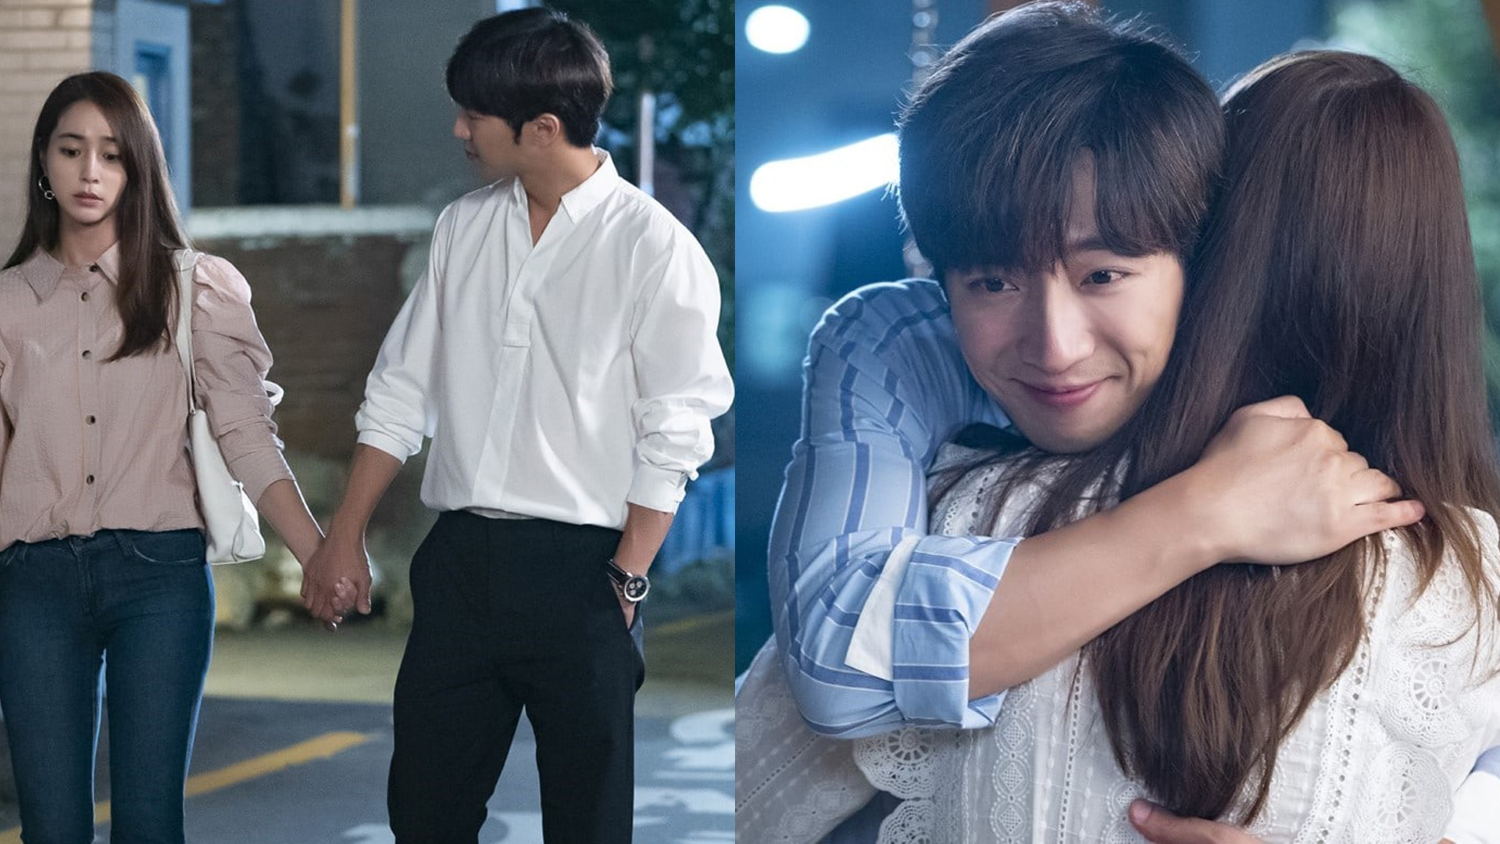 Lee Min Jung And Lee Sang Yeob Share A Heartfelt Moment In “Once Again”